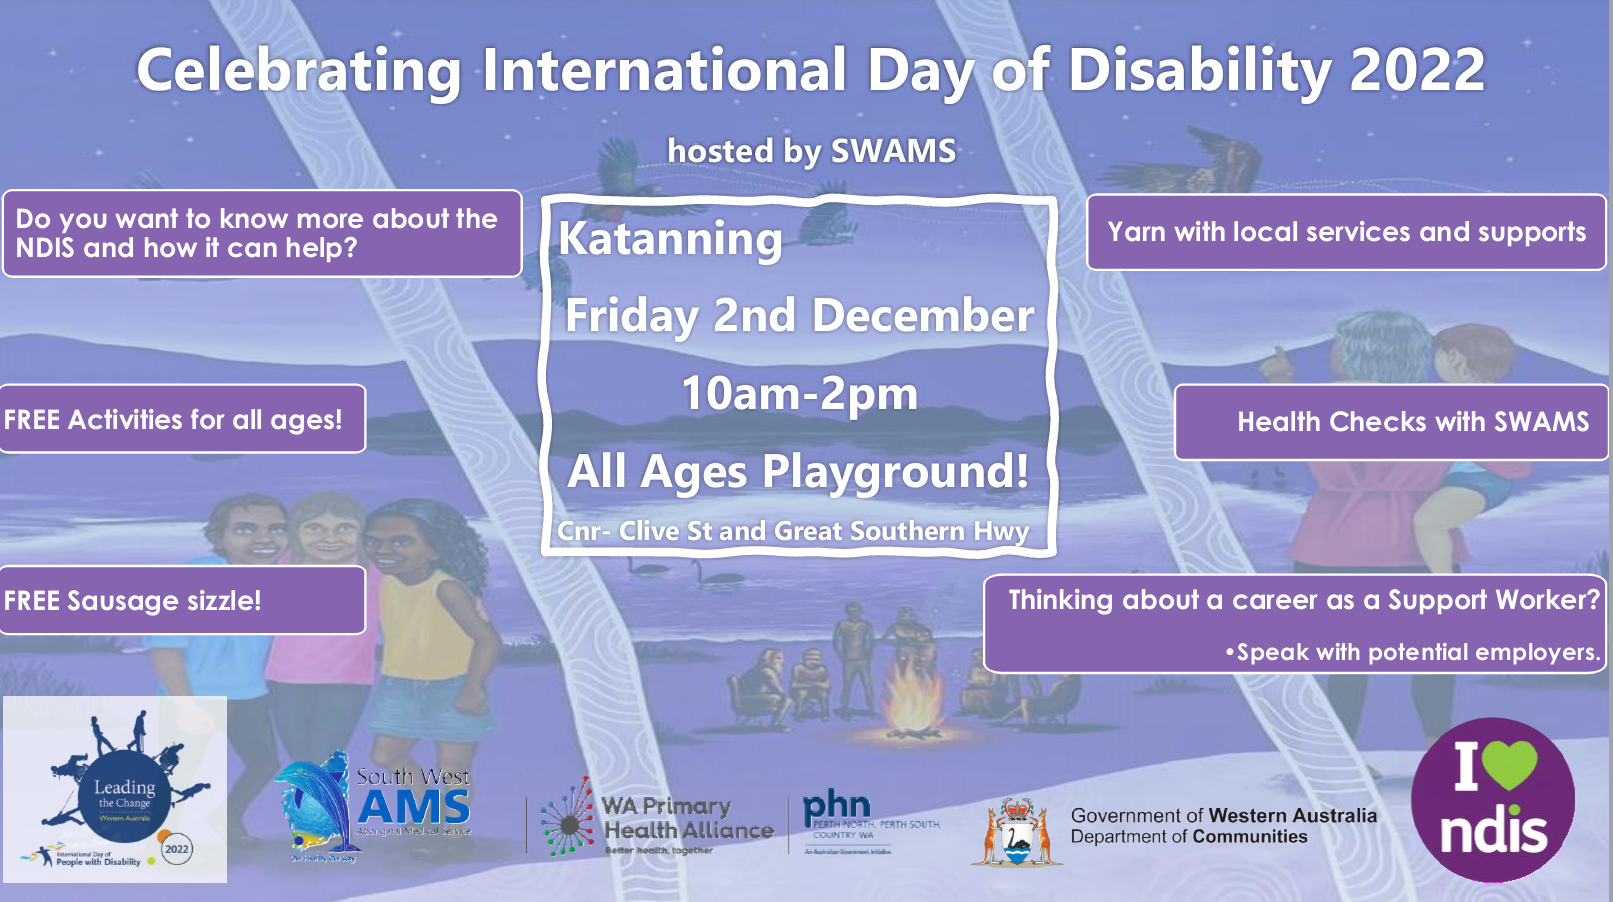 Poster for event: Do you want to know more about the NDIS and how it can help? Free activities for all ages, Free sausage sizzle and yarn with local services and supports